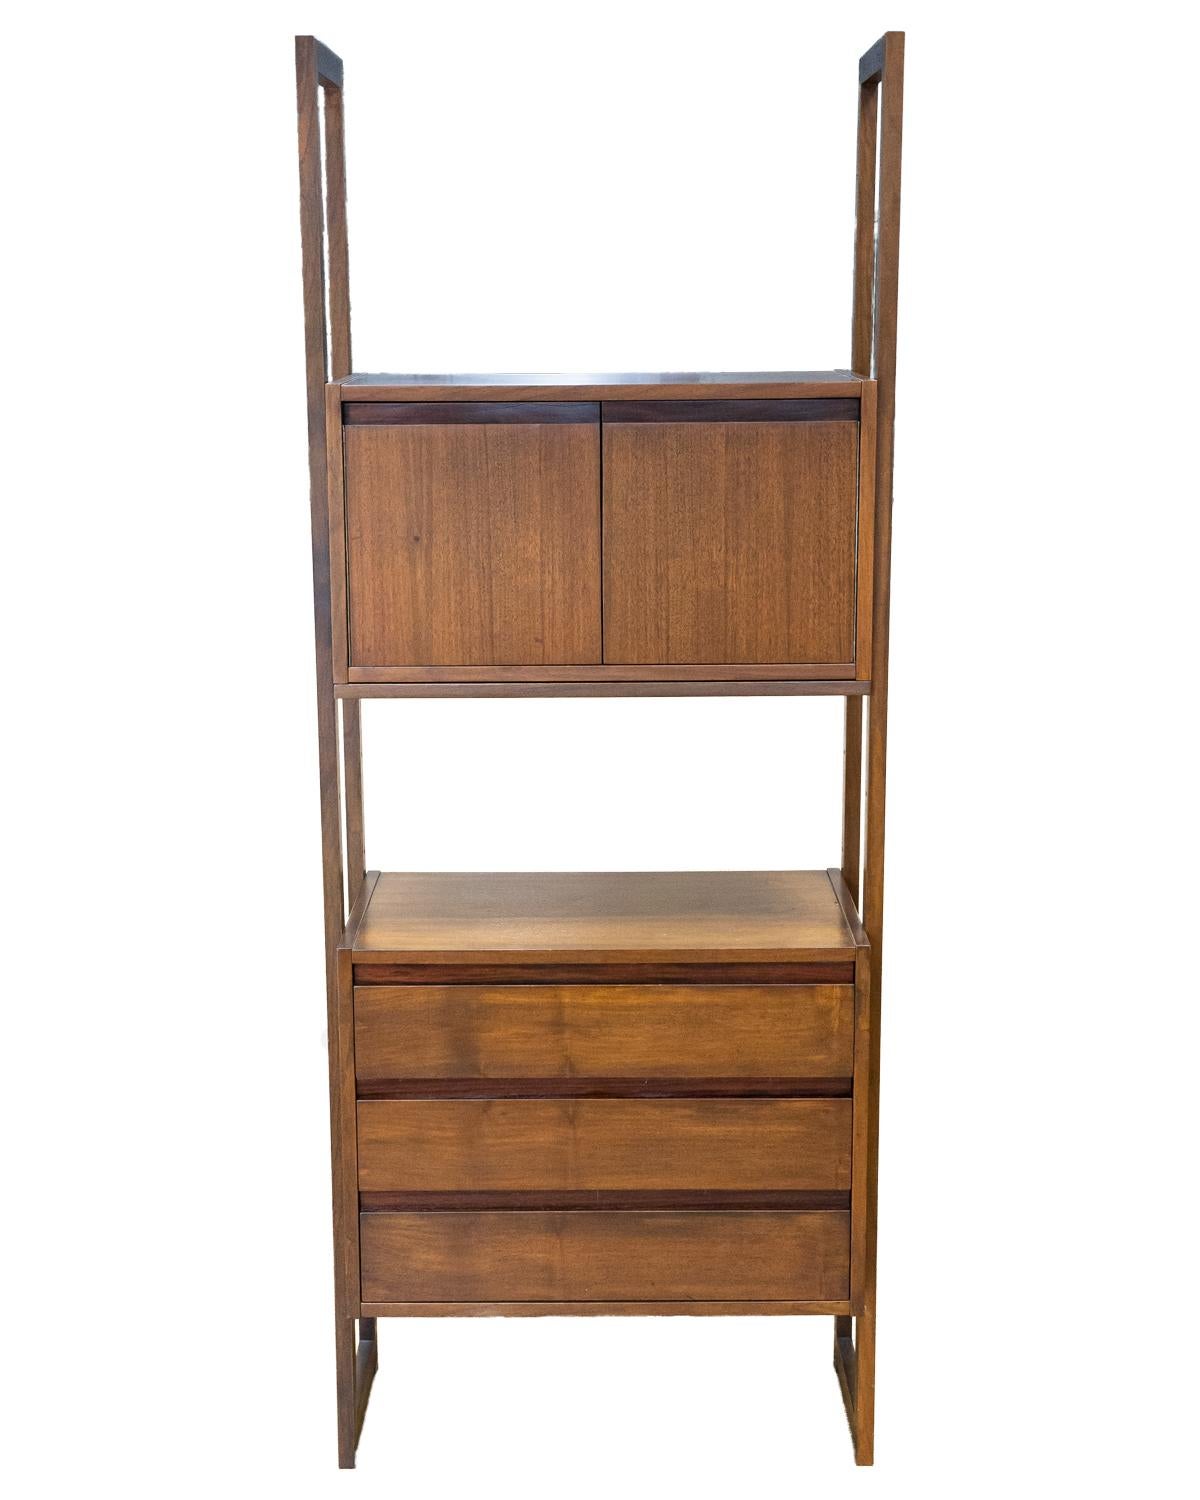 An elegant Mid-Century Modern walnut wall unit, cabinet is also a drop down desk. This piece is in very good vintage condition. It consists of three sections, each with shelving and cabinets. Fully assembled, this wall unit measures 74.5 in high, 86